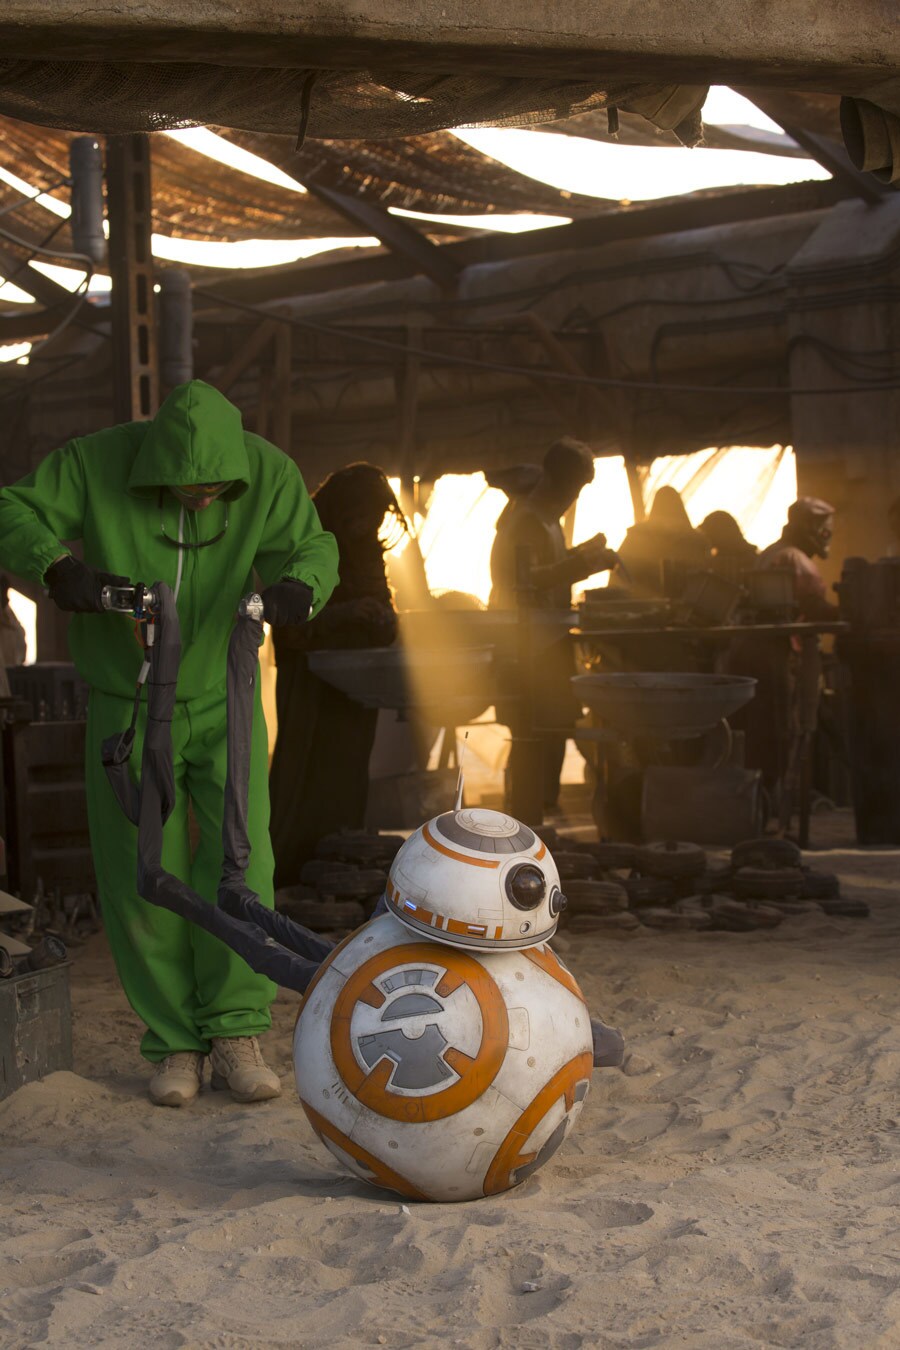 Dressed in a green sweatsuit, puppeteer Brian Herring maneuvers BB-8 while on the set of The Force Awakens..